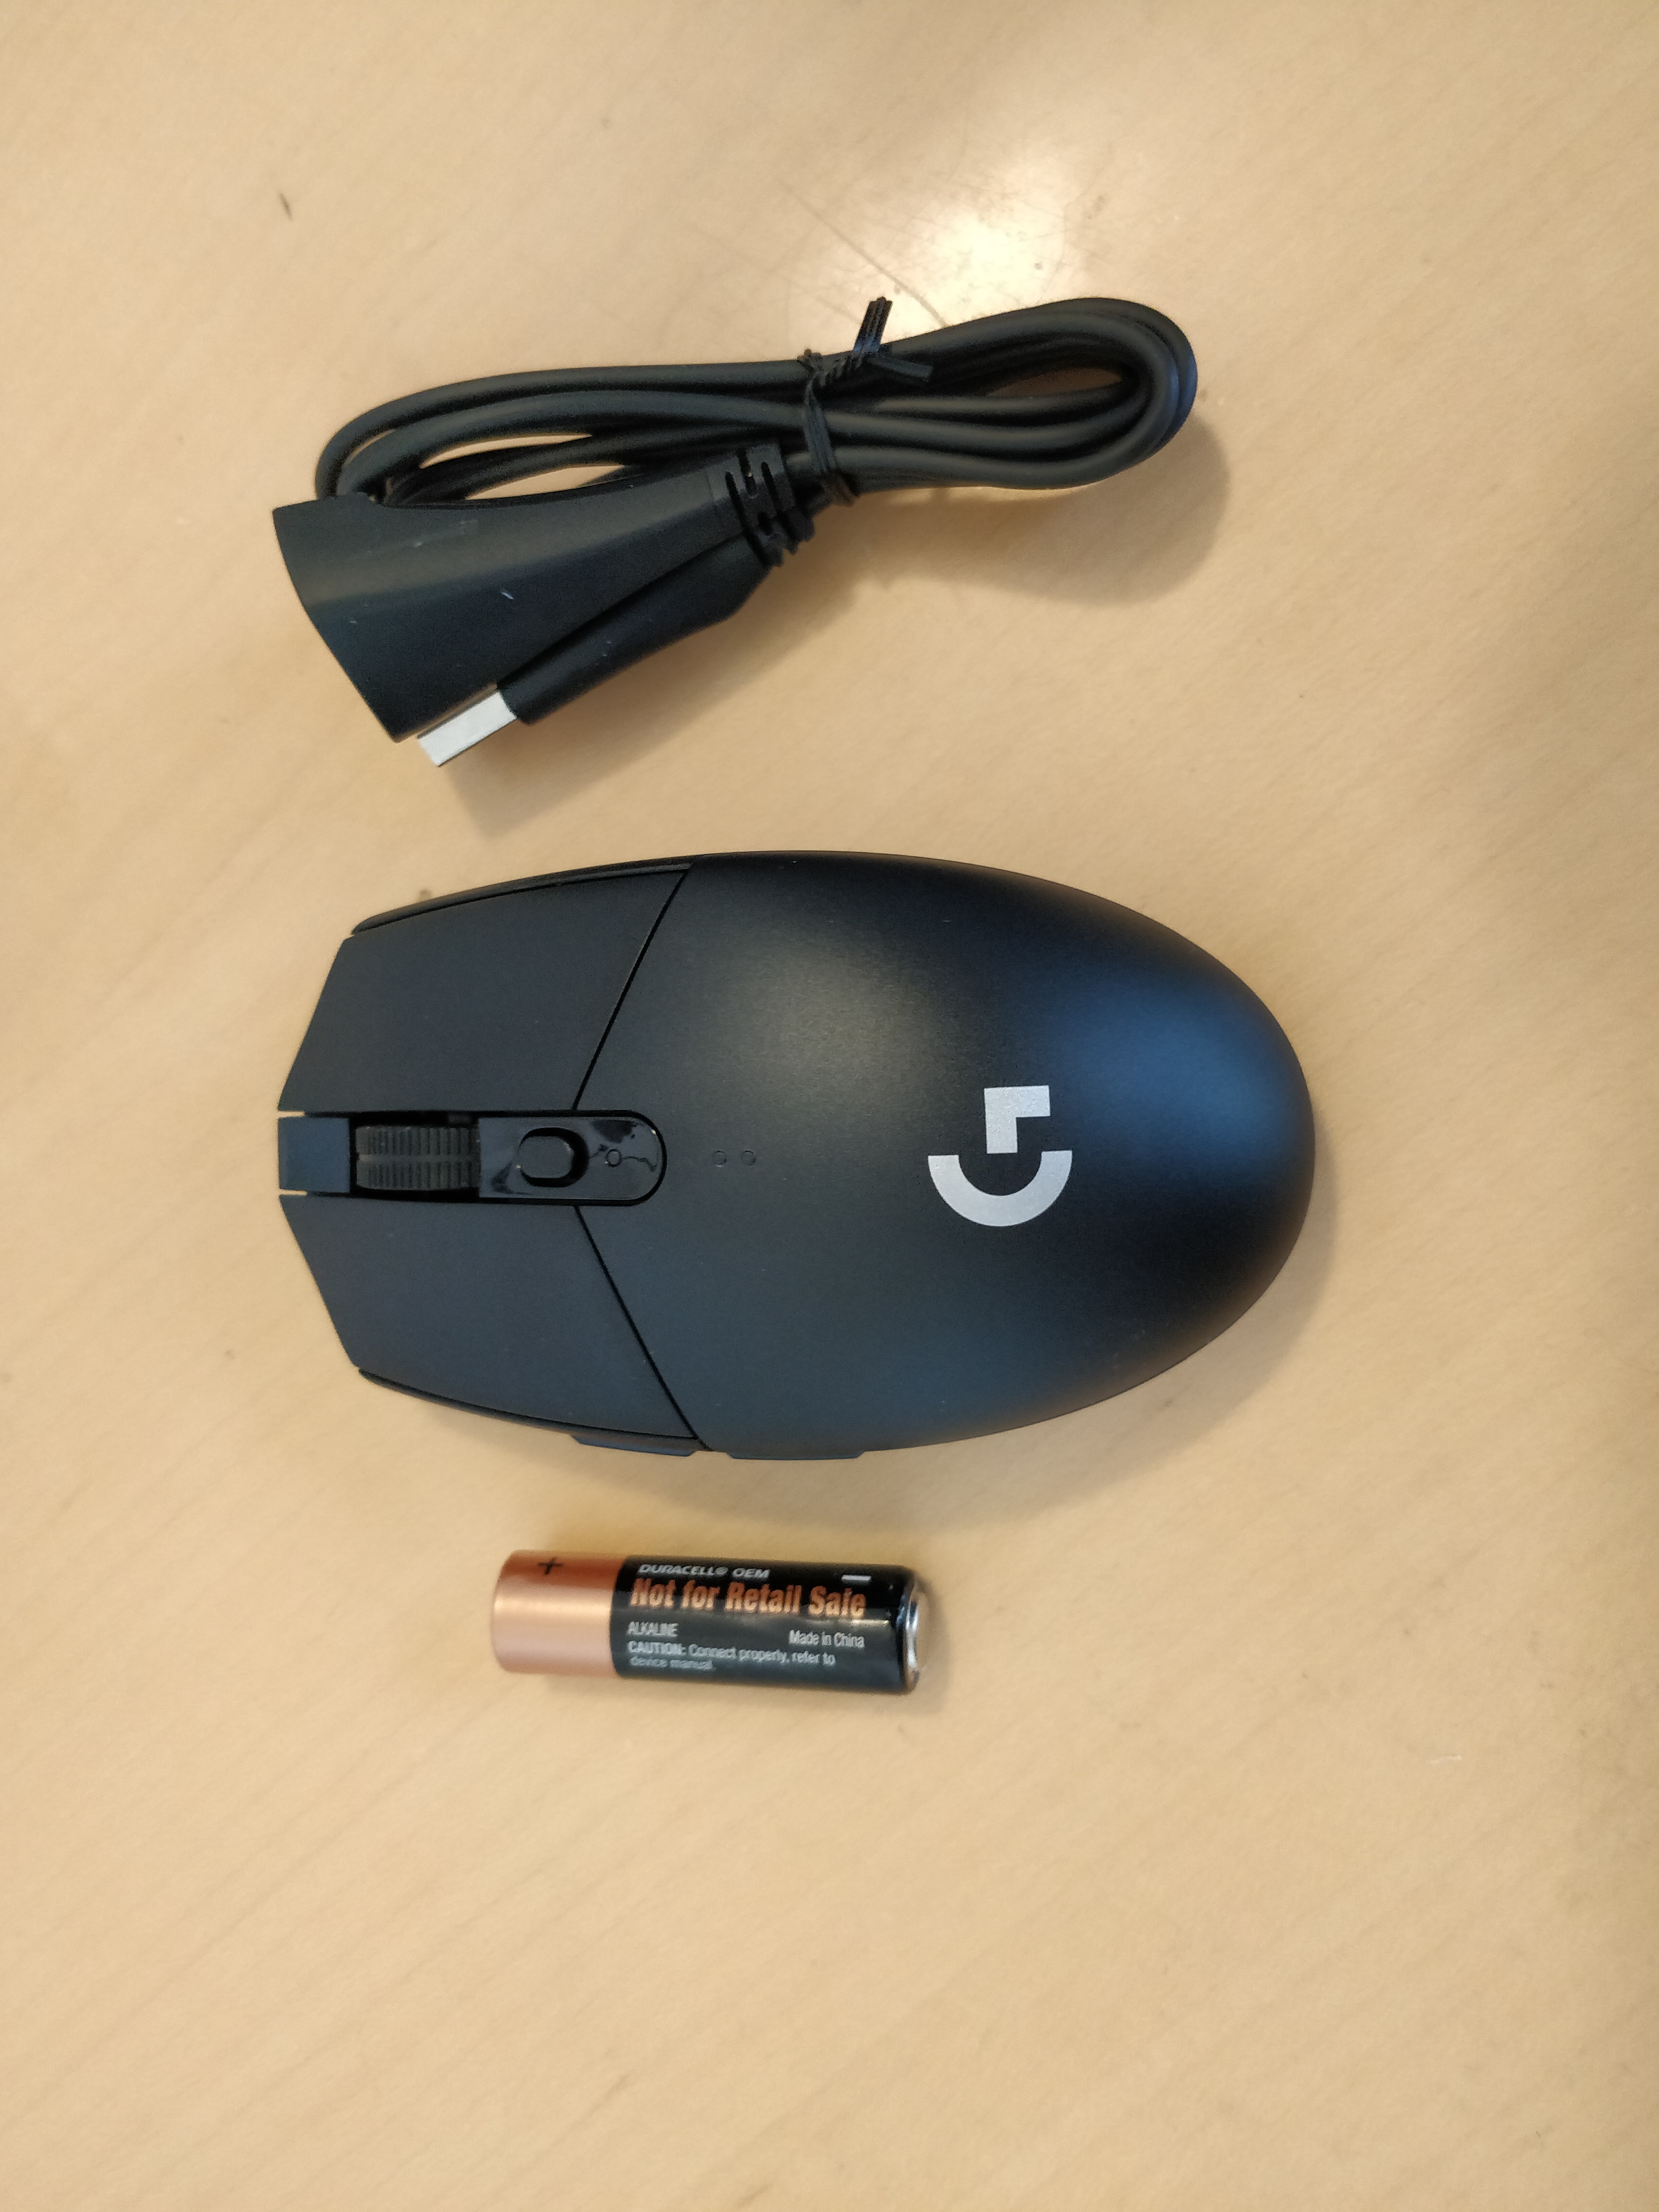 Test: G305 gaming mouse | eReviews.dk